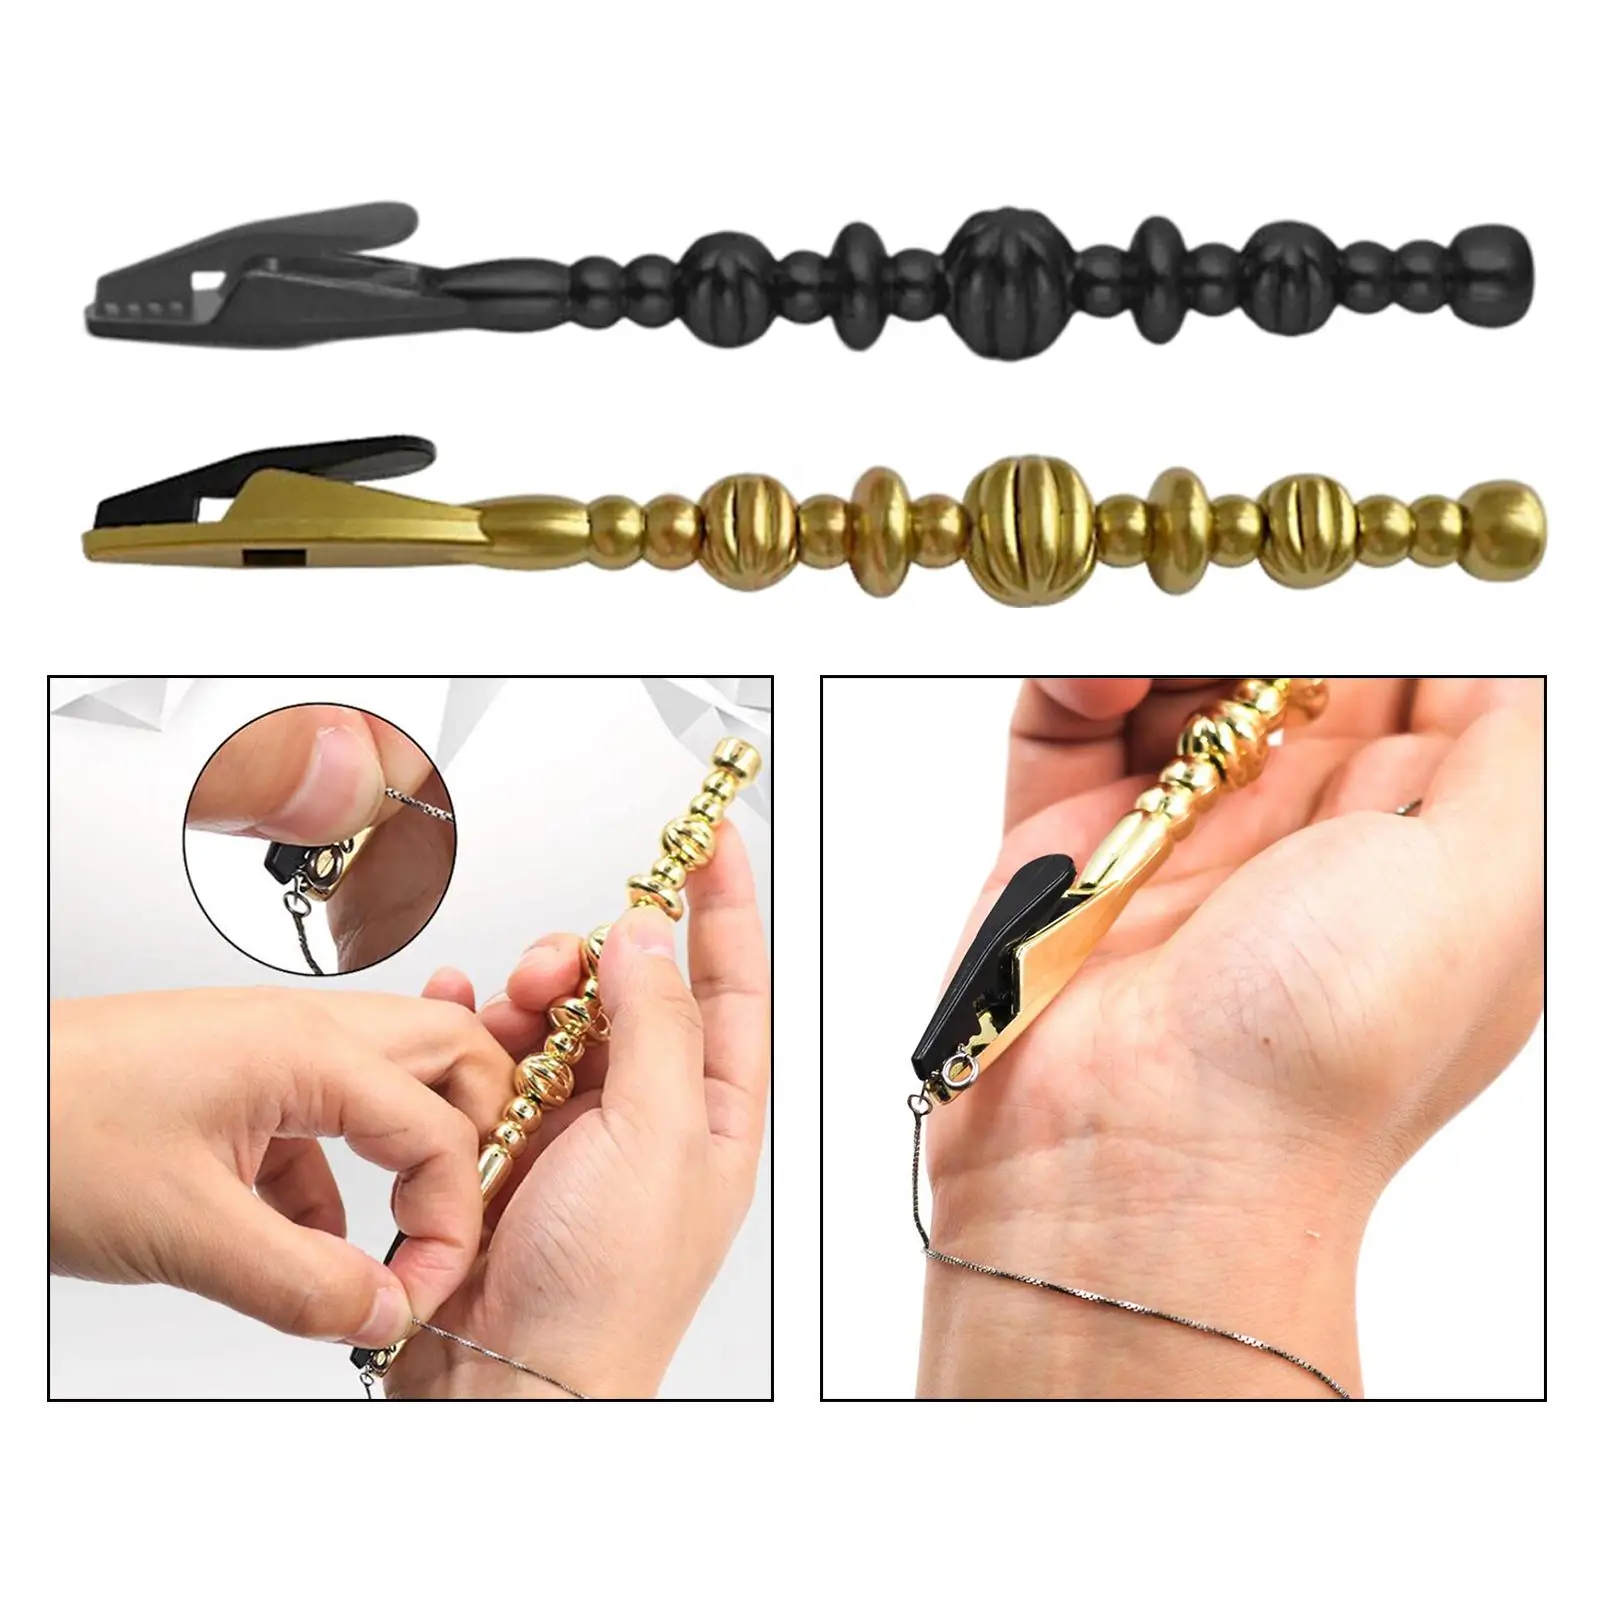 Bracelet Jewelry Helper Tool Fastening Aid Fastening and Hooking Equipment Clasp Tool for Bracelets Watch Necklace Dressing